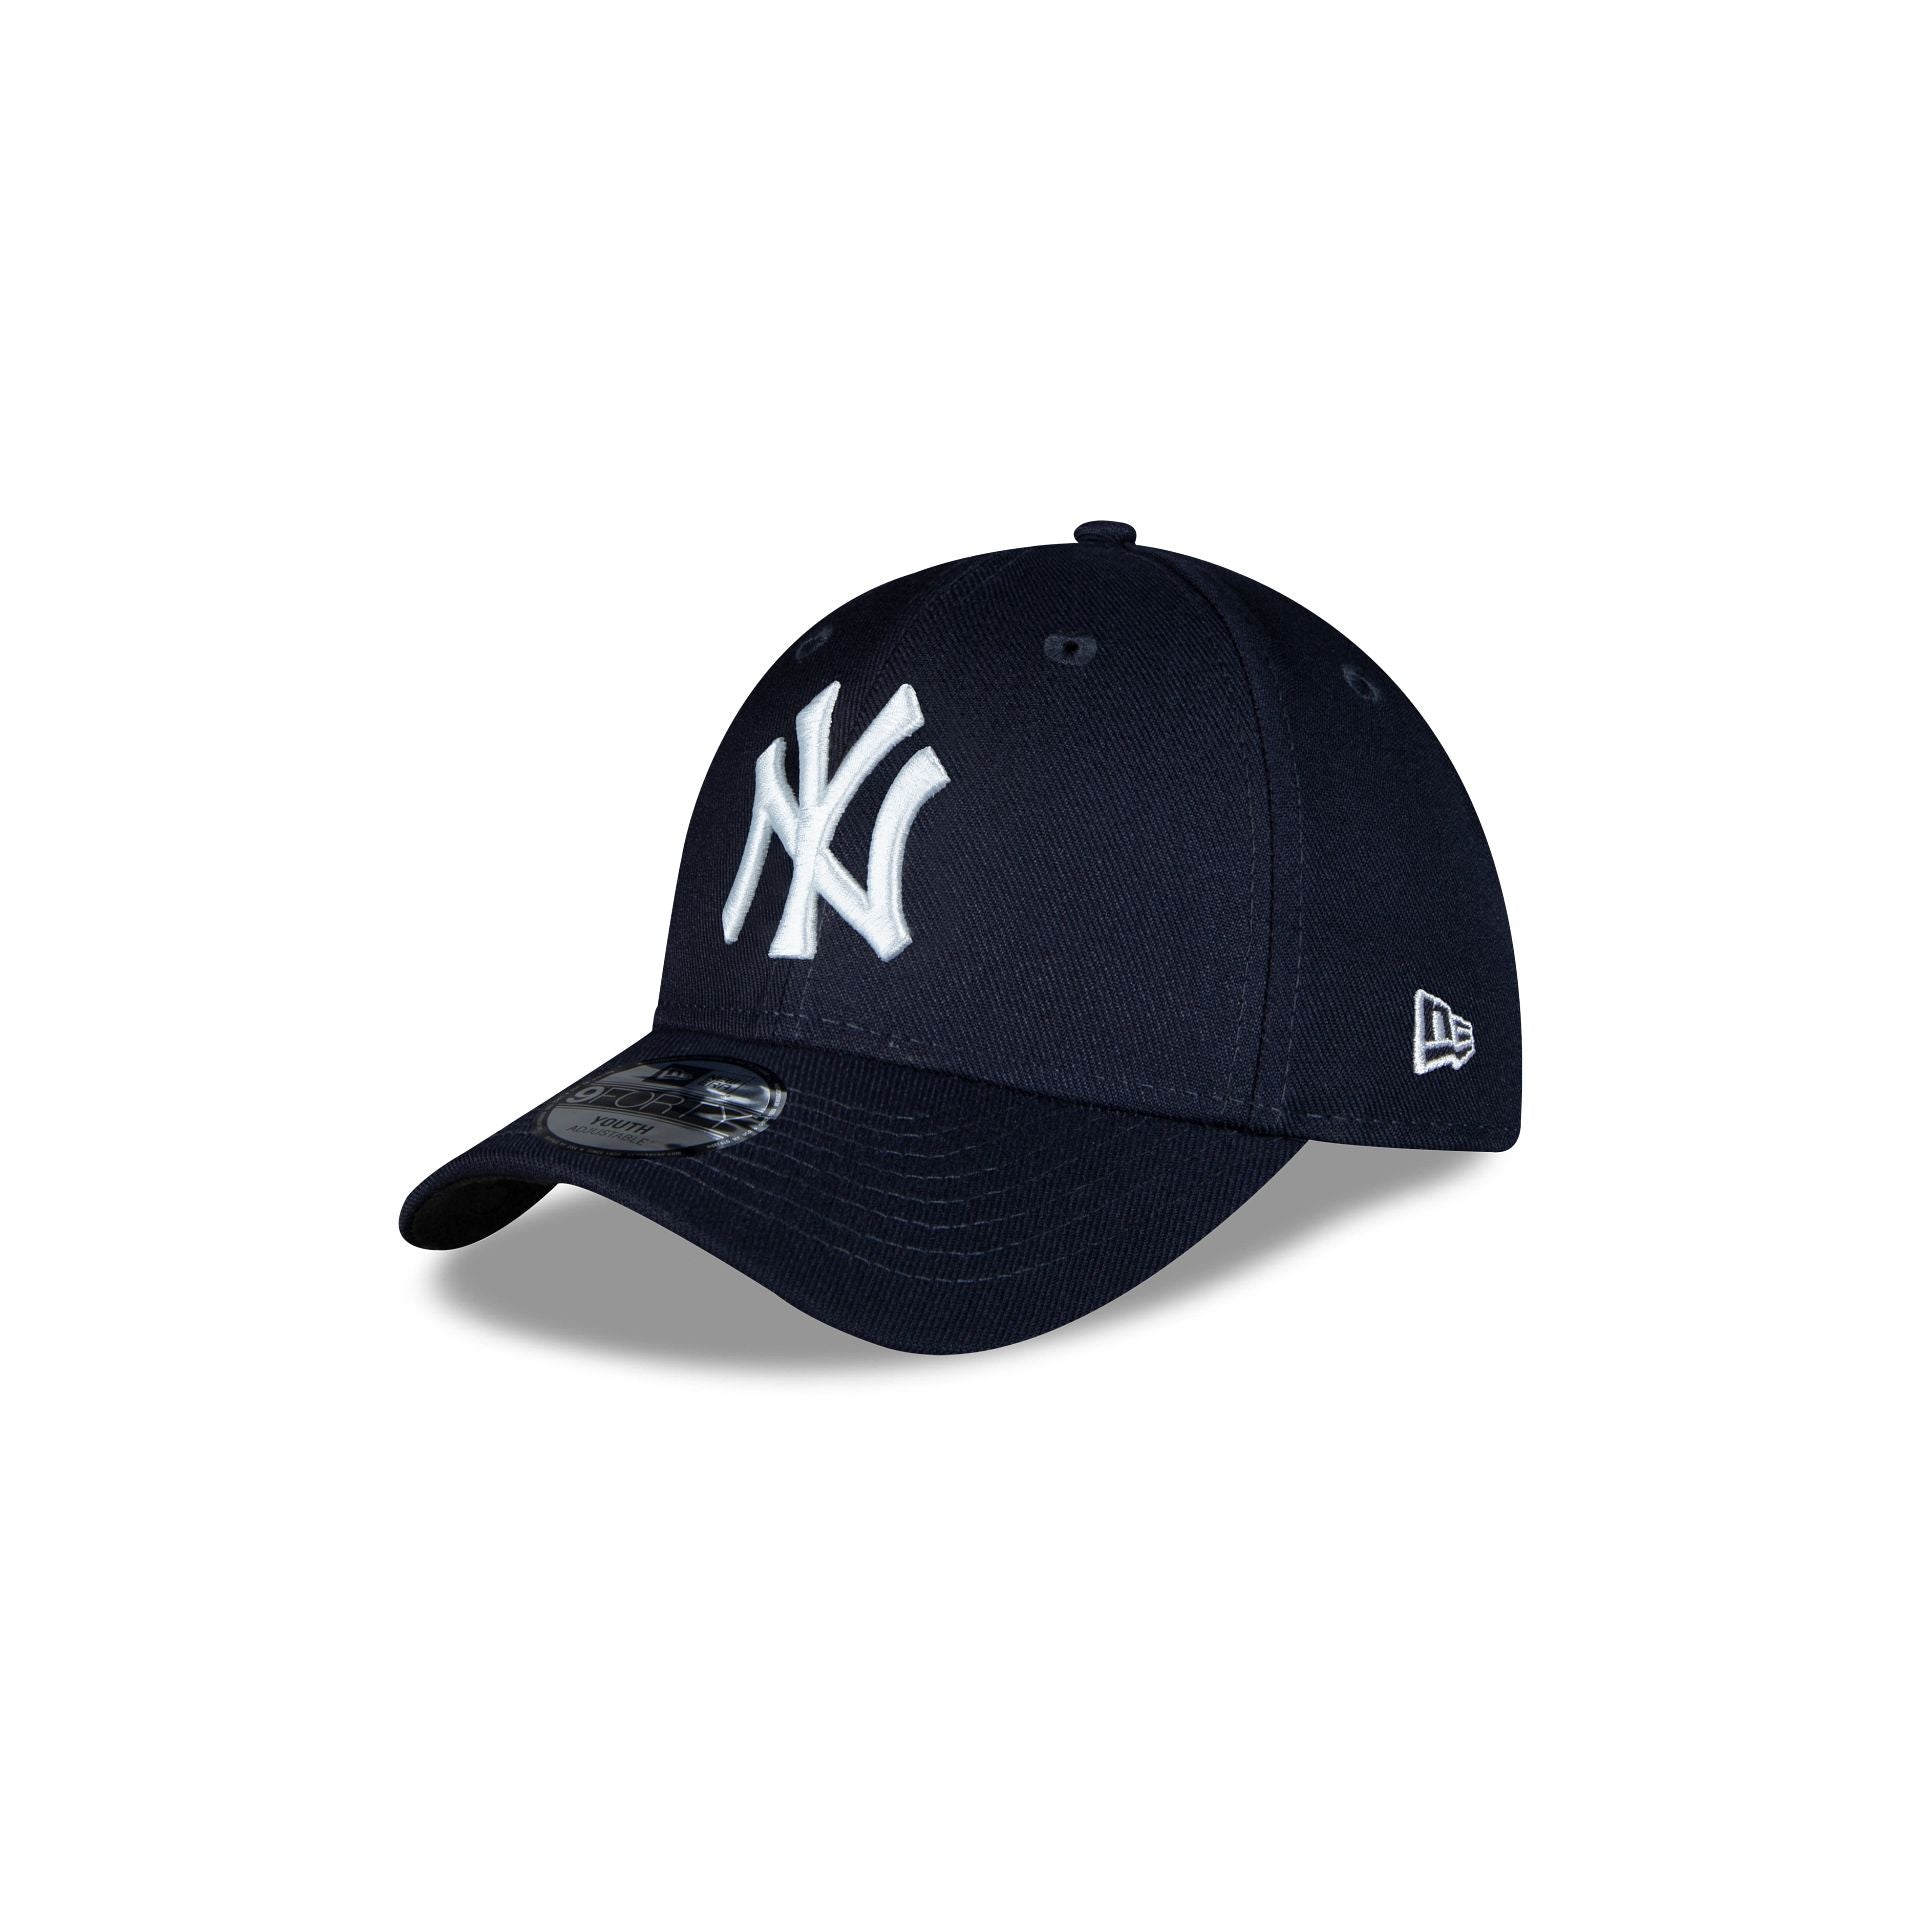 New York Yankees The League Hat 9FORTY – Kids Cap Era New Adjustable